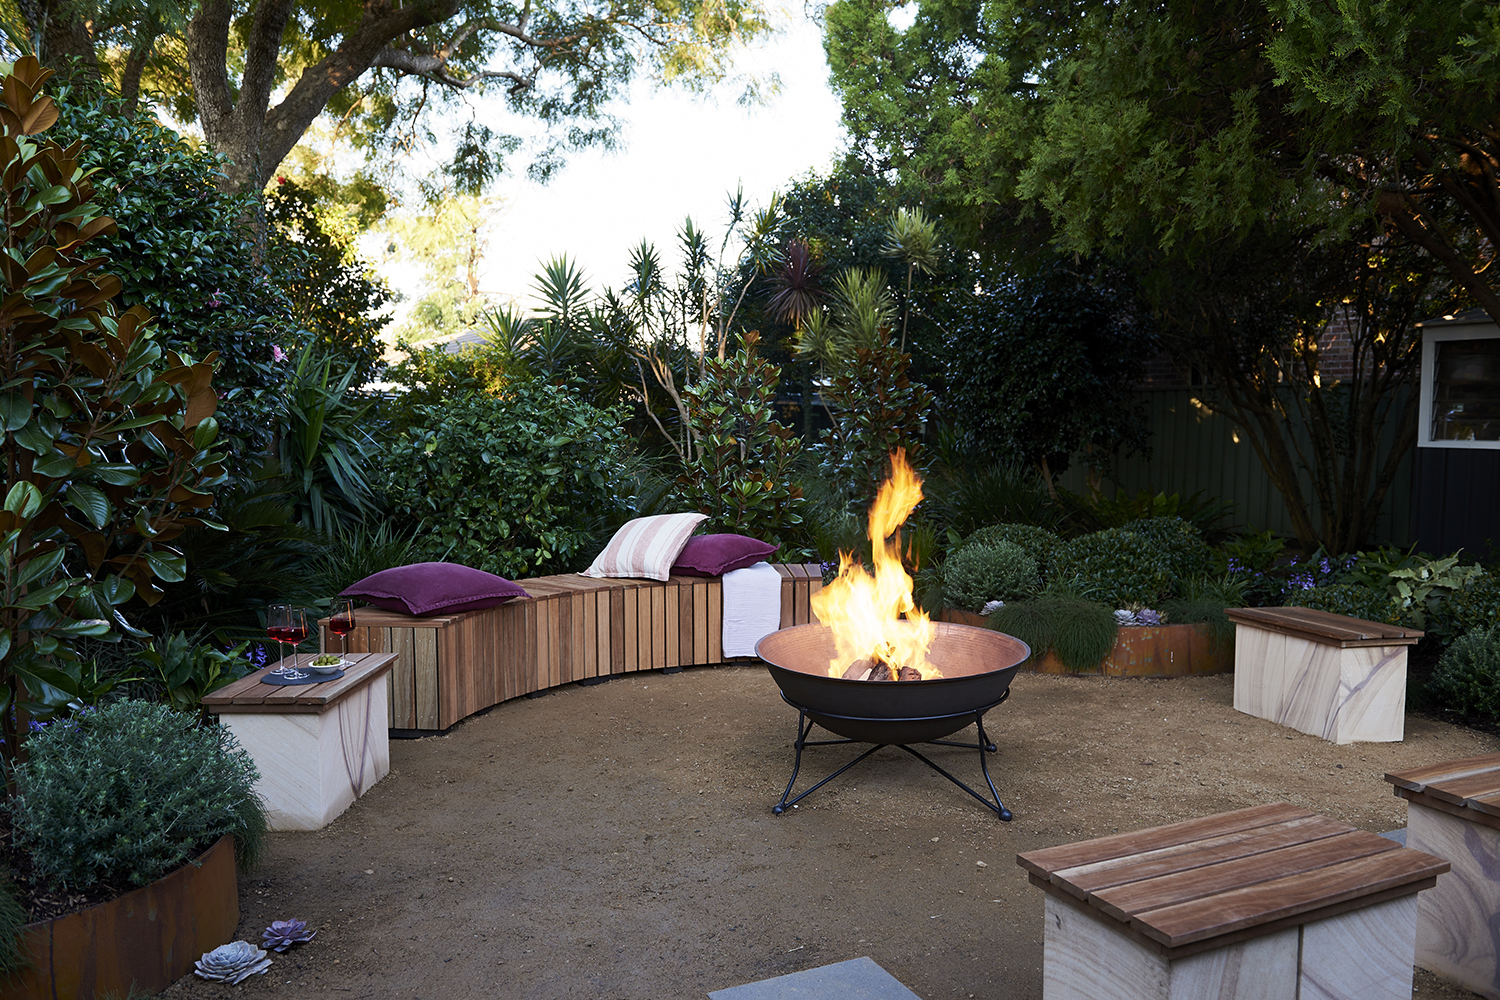 Adam Dovile Make A Fire Pit, How To Make A Fire Pit Area In Your Backyard